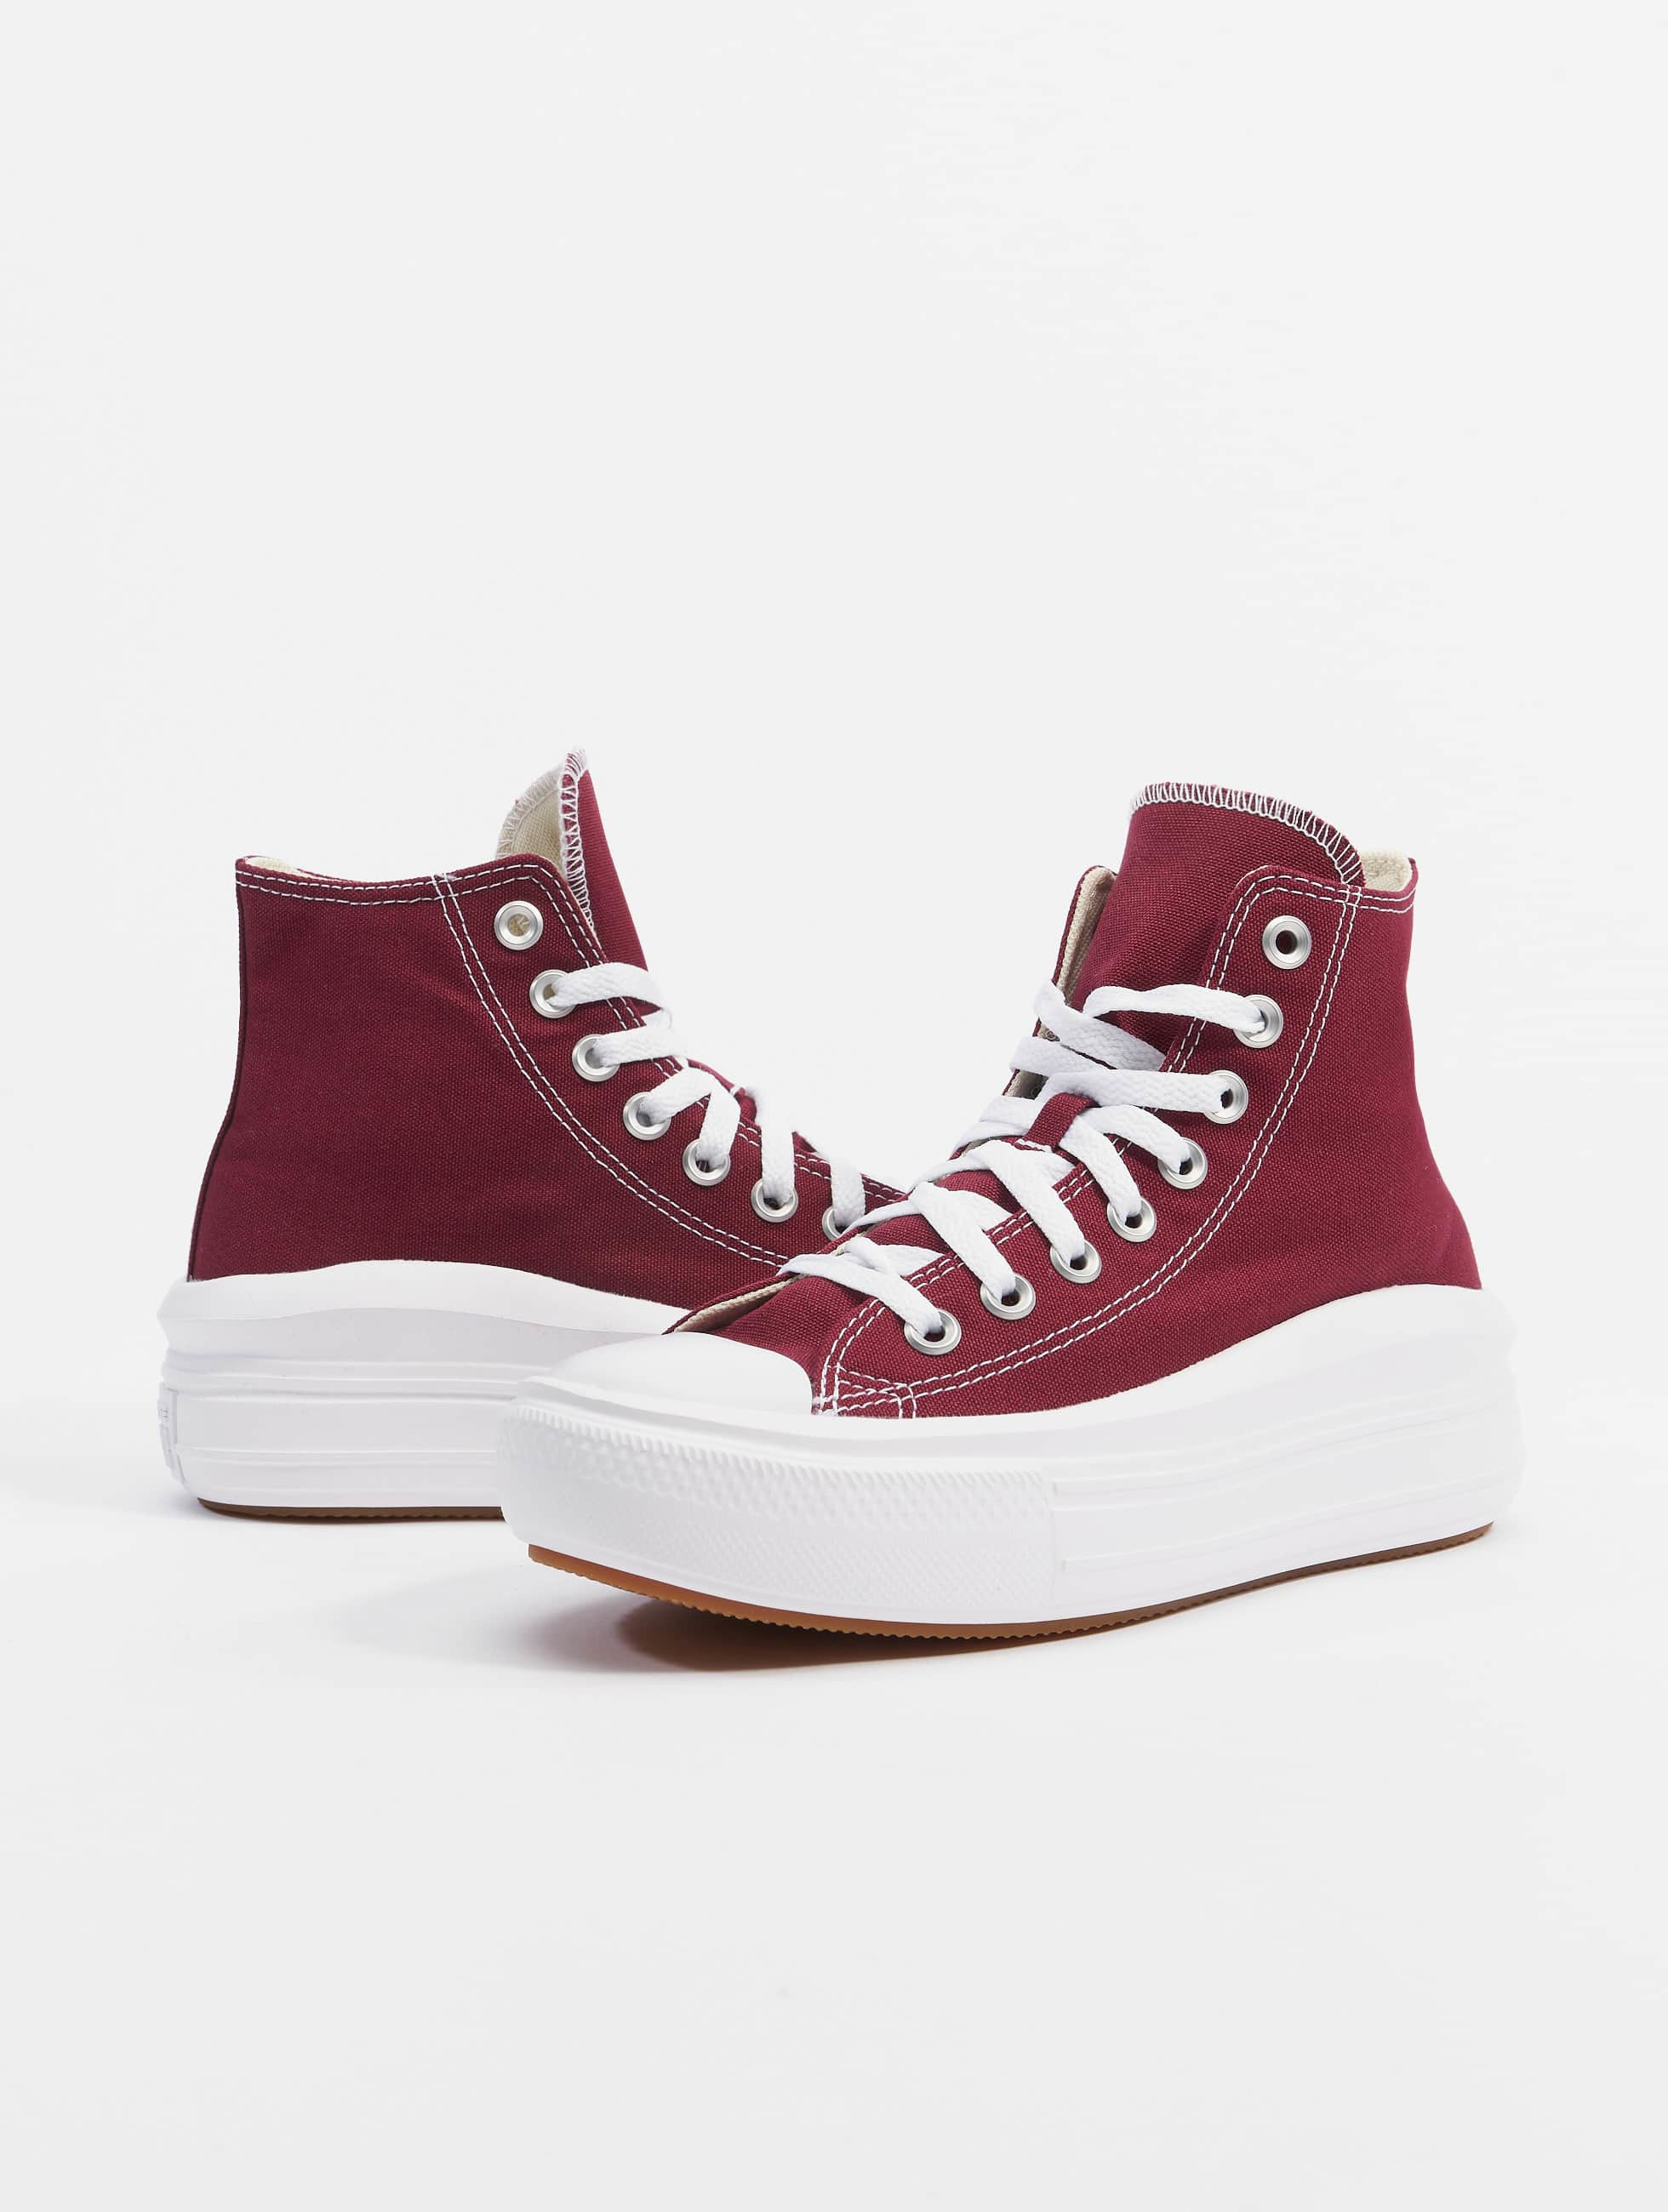 Top 61+ images converse all star dark red - In.thptnganamst.edu.vn